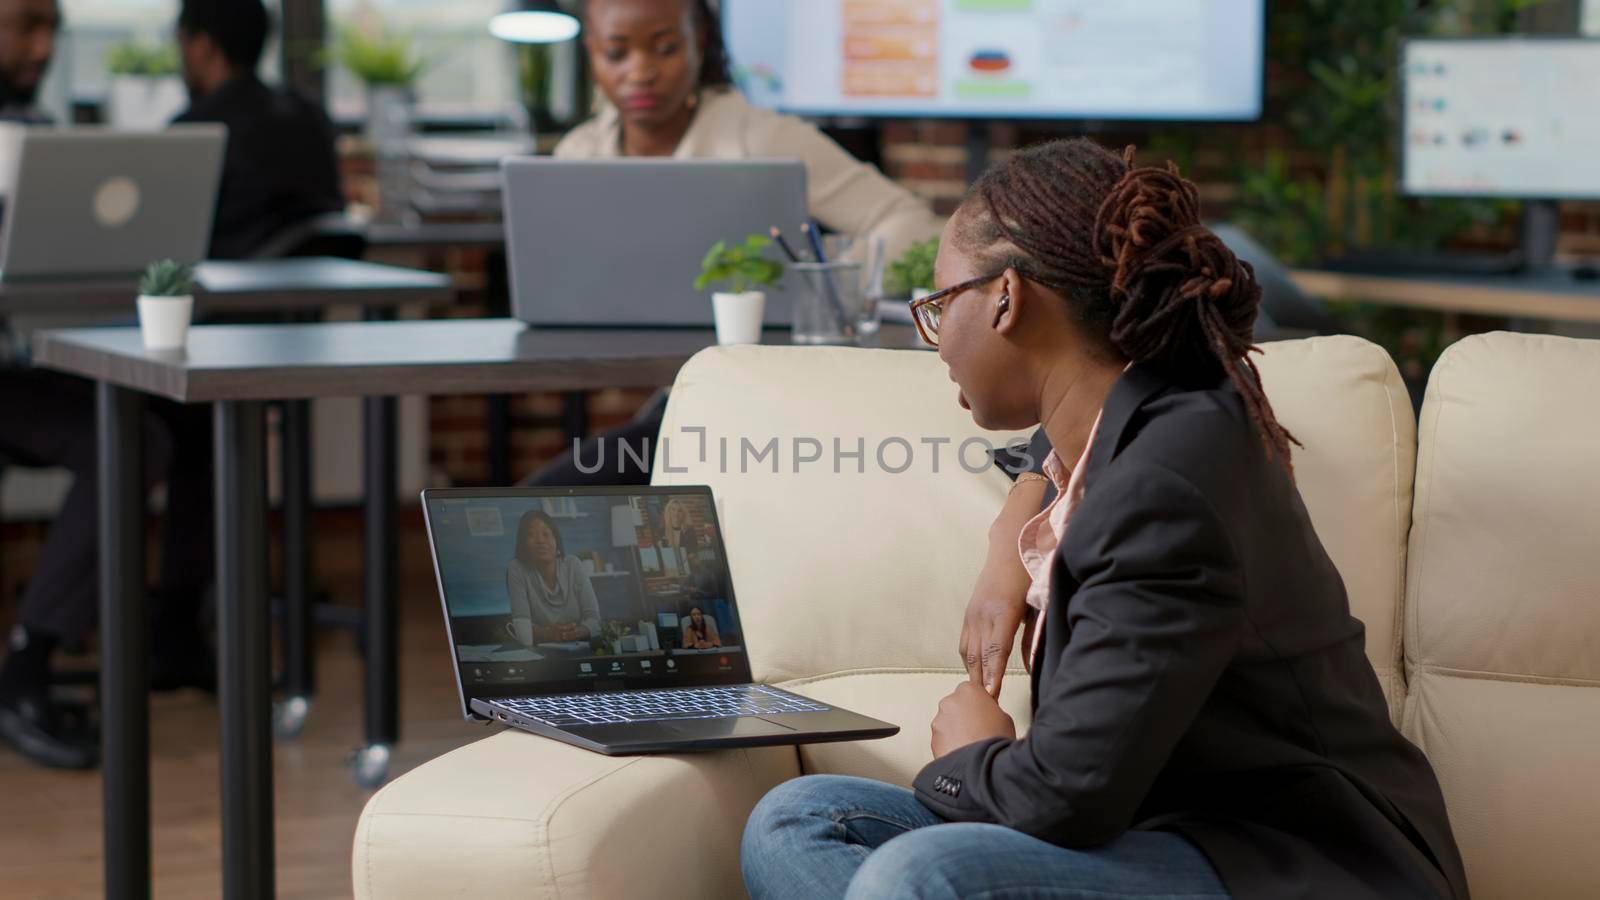 Female worker attending business meeting on videocall by DCStudio